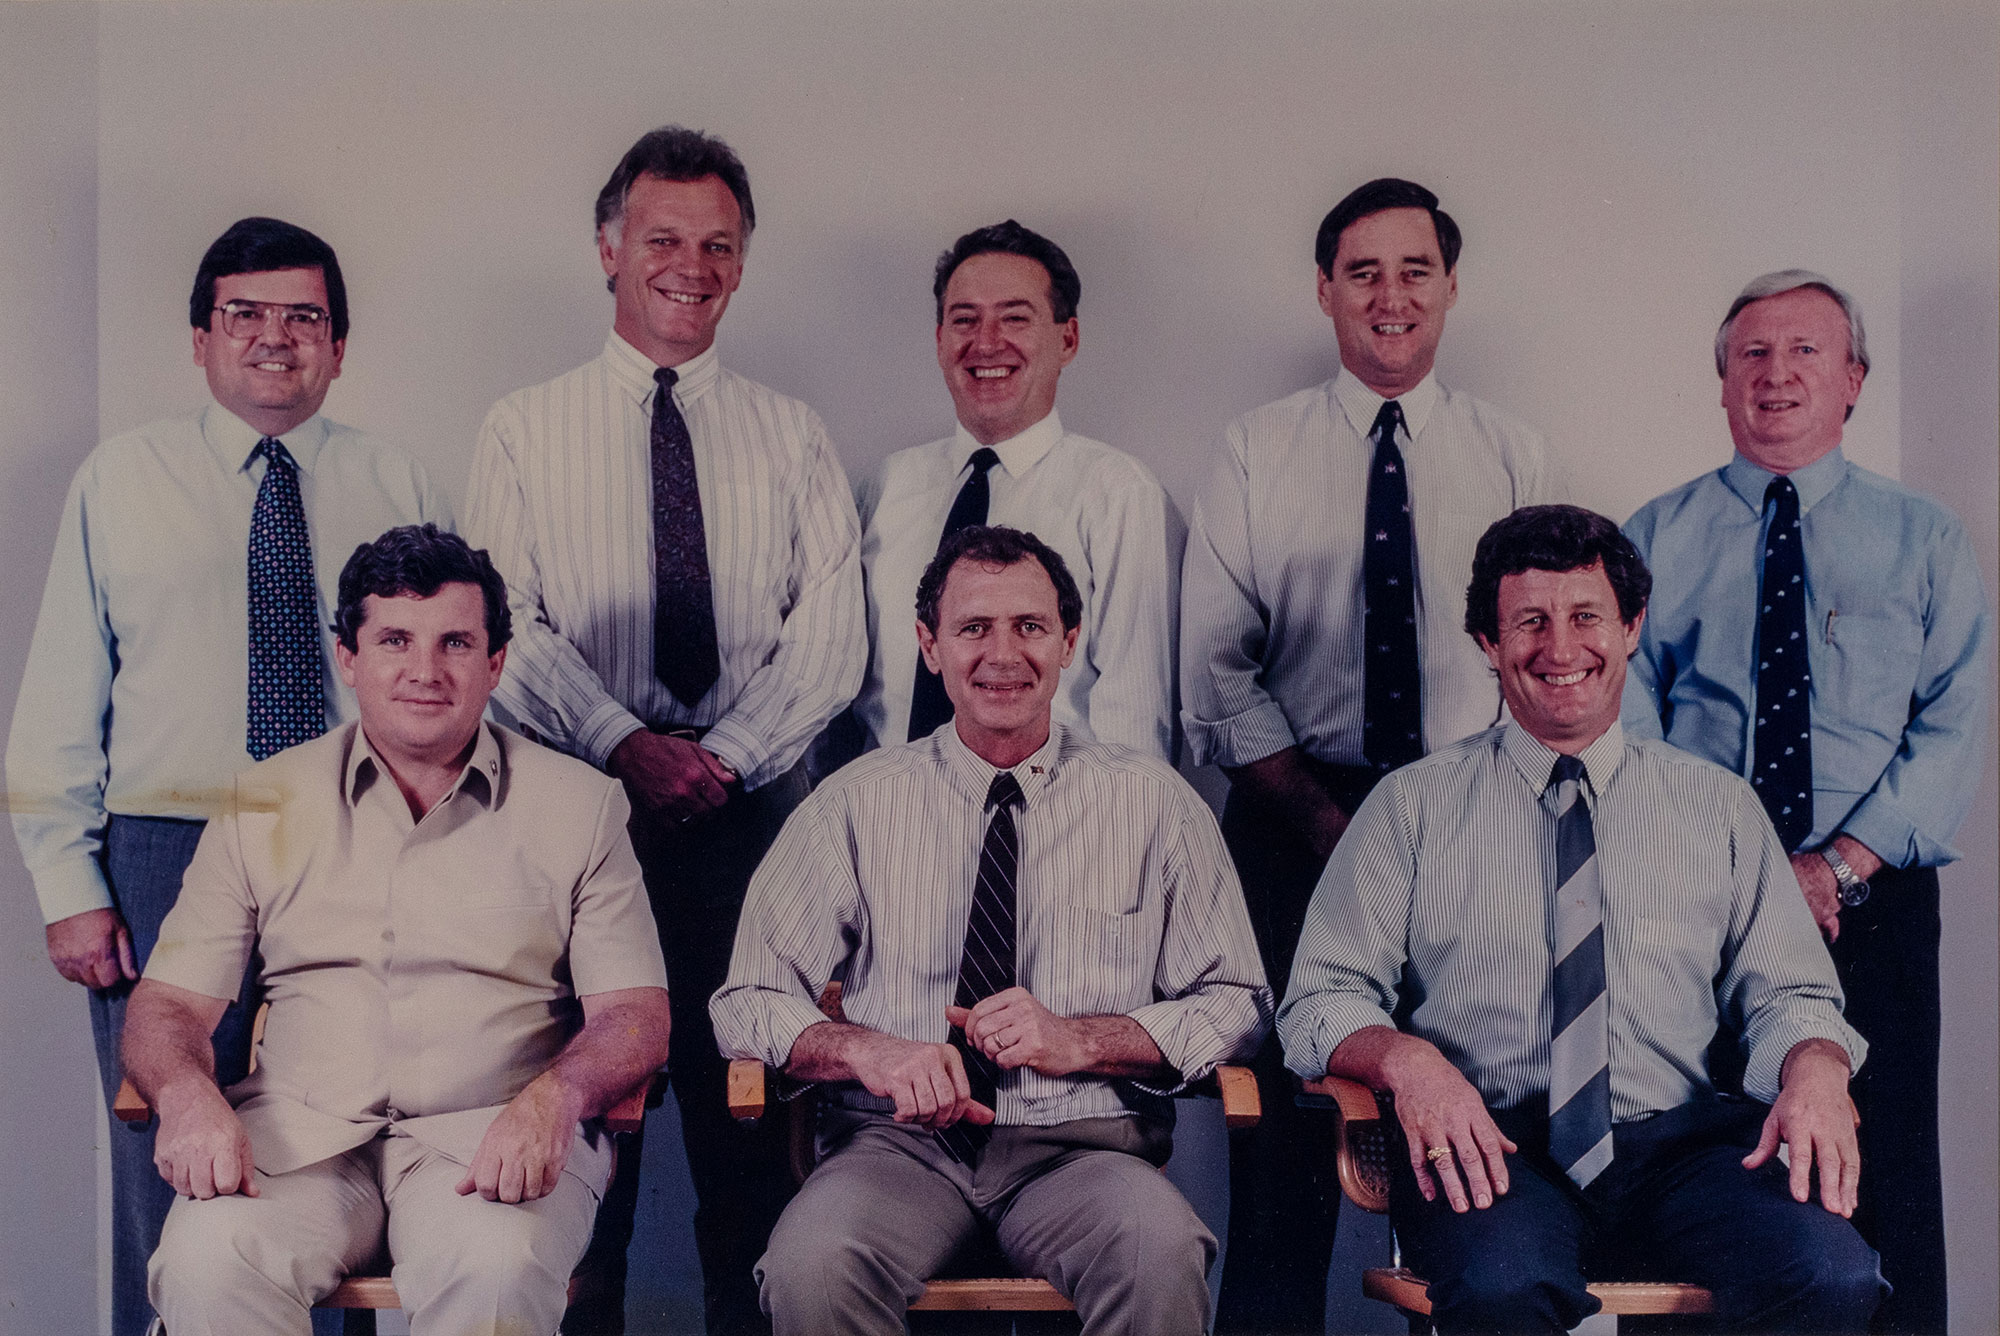 Back row (L-R): Hon EH Poole MLA, Hon SP Hatton MLA, Hon DW Manzie MLA, Hon MA Reed MLA, Hon FA Finch MLA Front row (L-R): Hon SL Stone MLA, Hon MB Perron MLA, Hon BF Coulter MLA<br />The Fifth Perron Ministry (30 November 1992 to 16 September 1993) included MH Ortmann.<br />Image courtesy of Library & Archives NT, Department of the Chief Minister, NTRS 3813 P1, Box 6, Item 12, Sixth Perron Ministry (16 September 1993 to 4 June 1994)